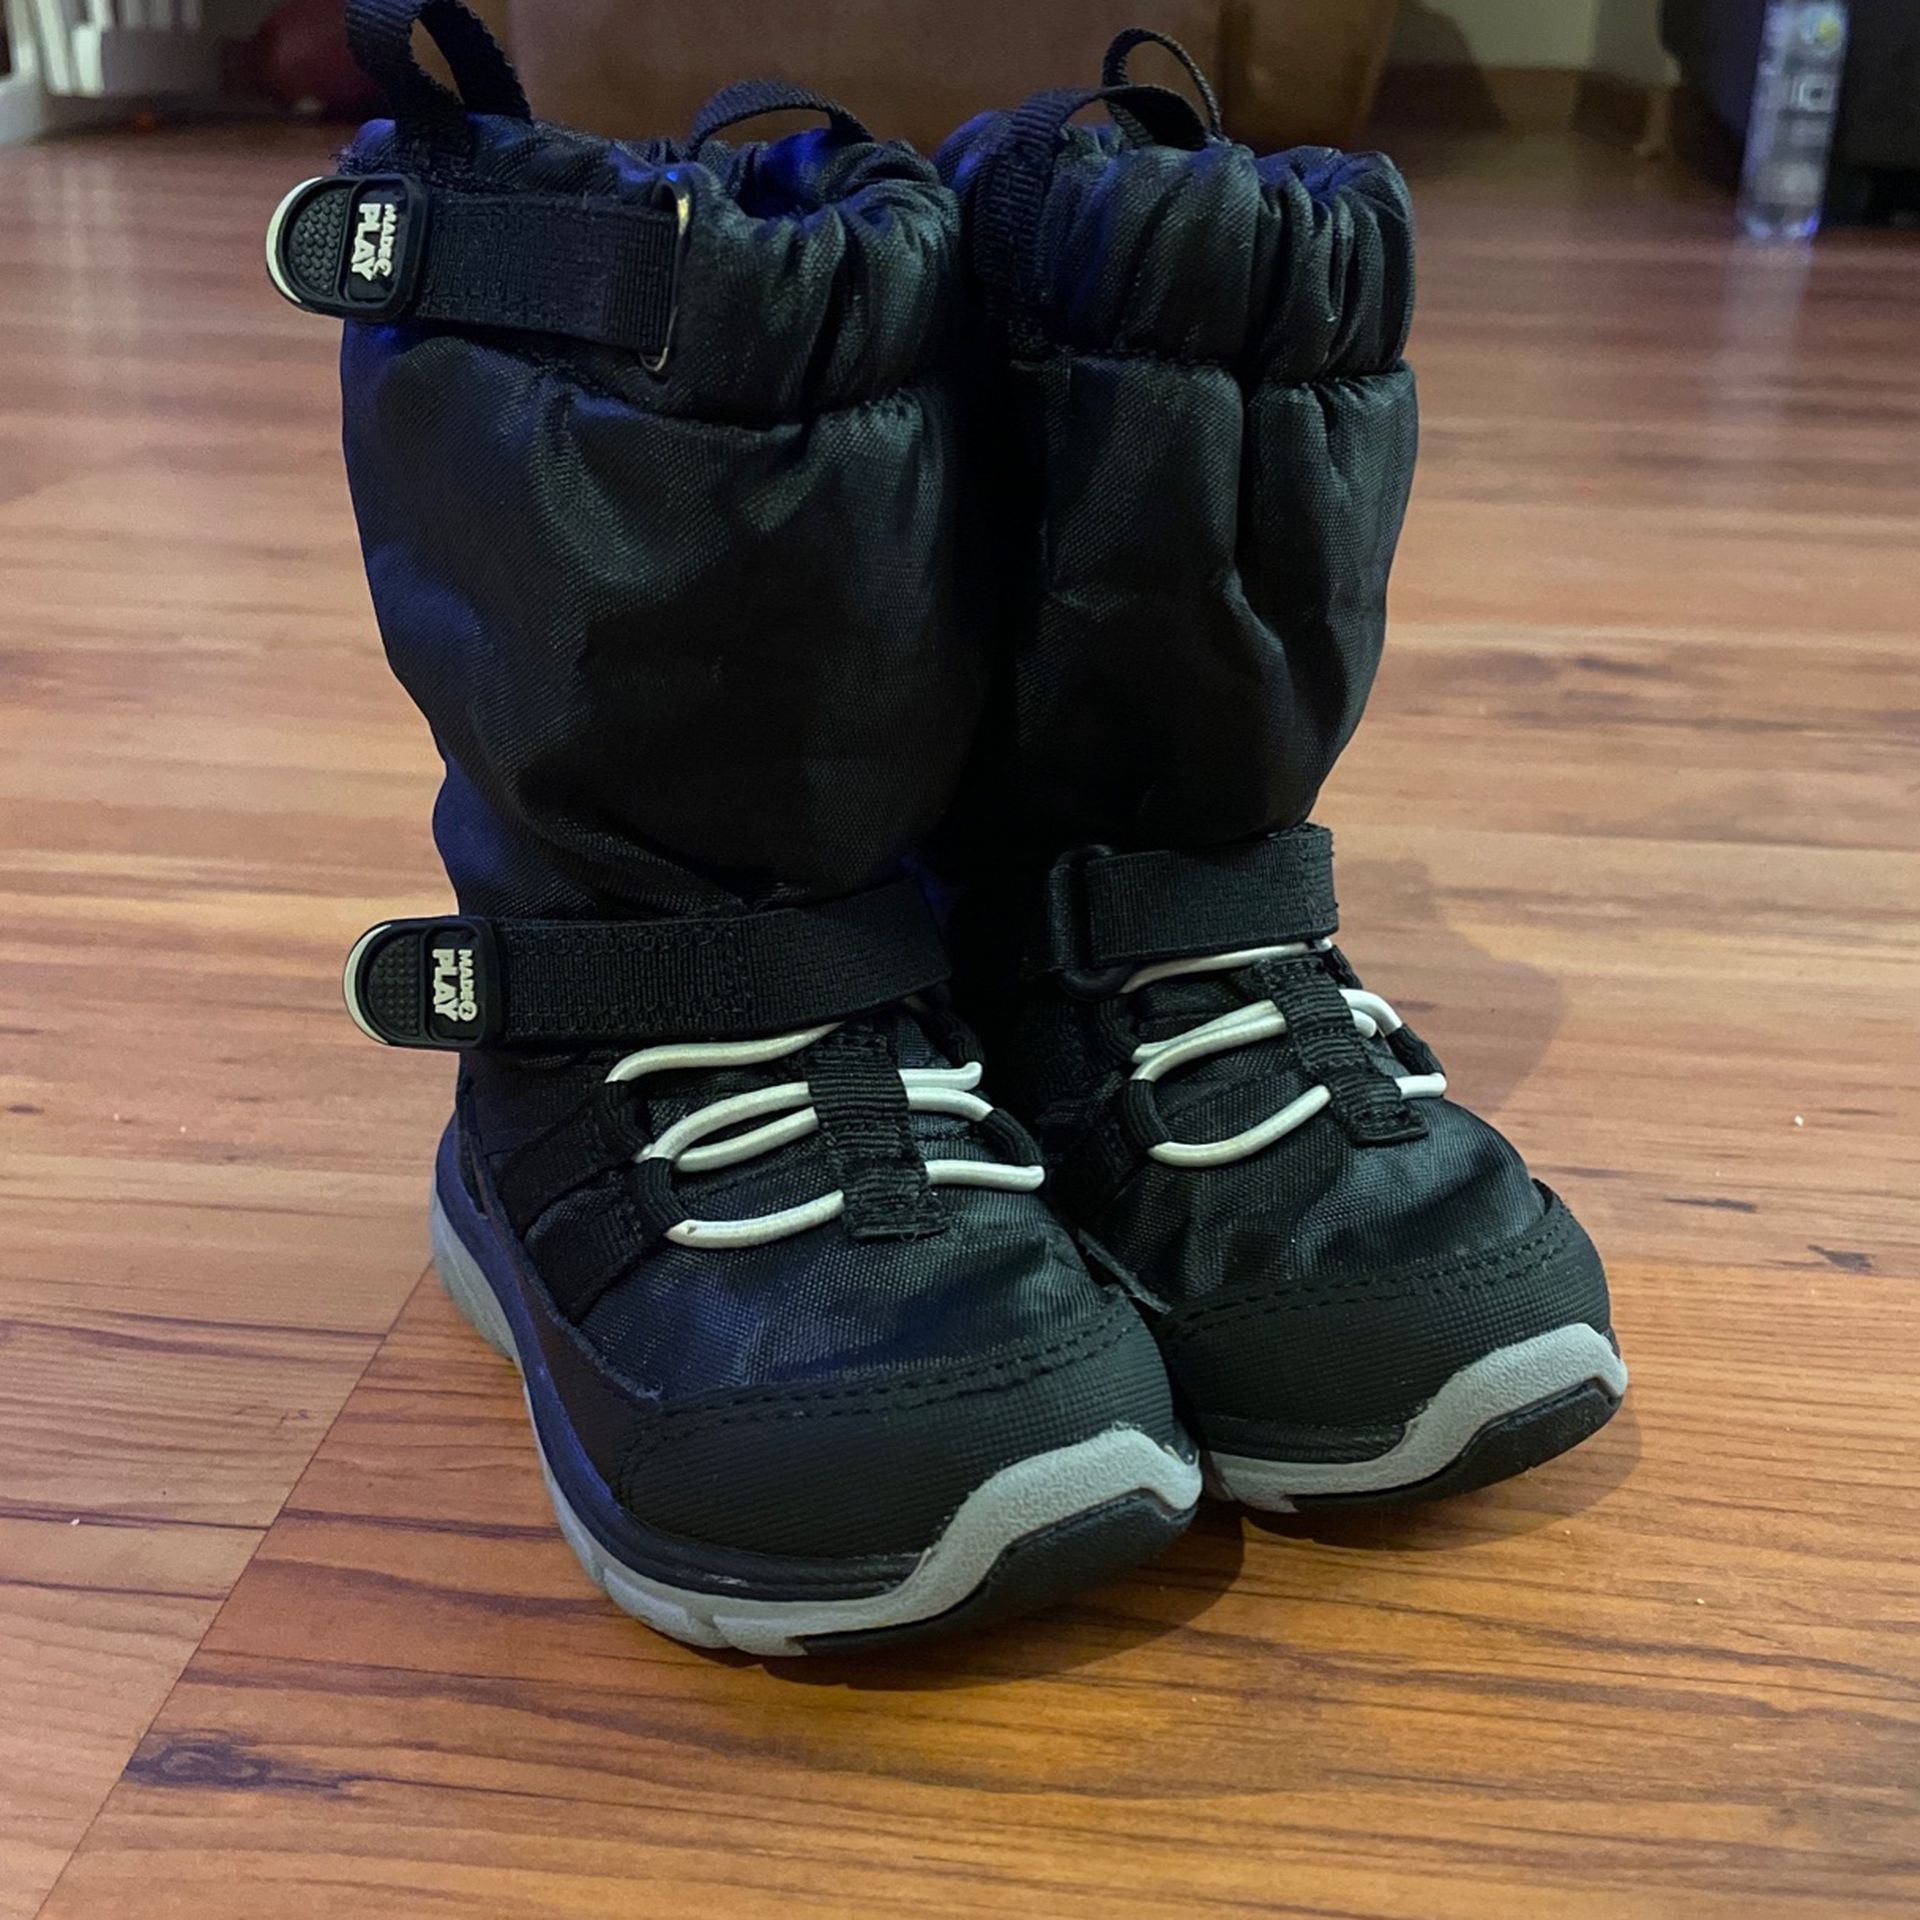 Toddler Snow Boots Size 4.5